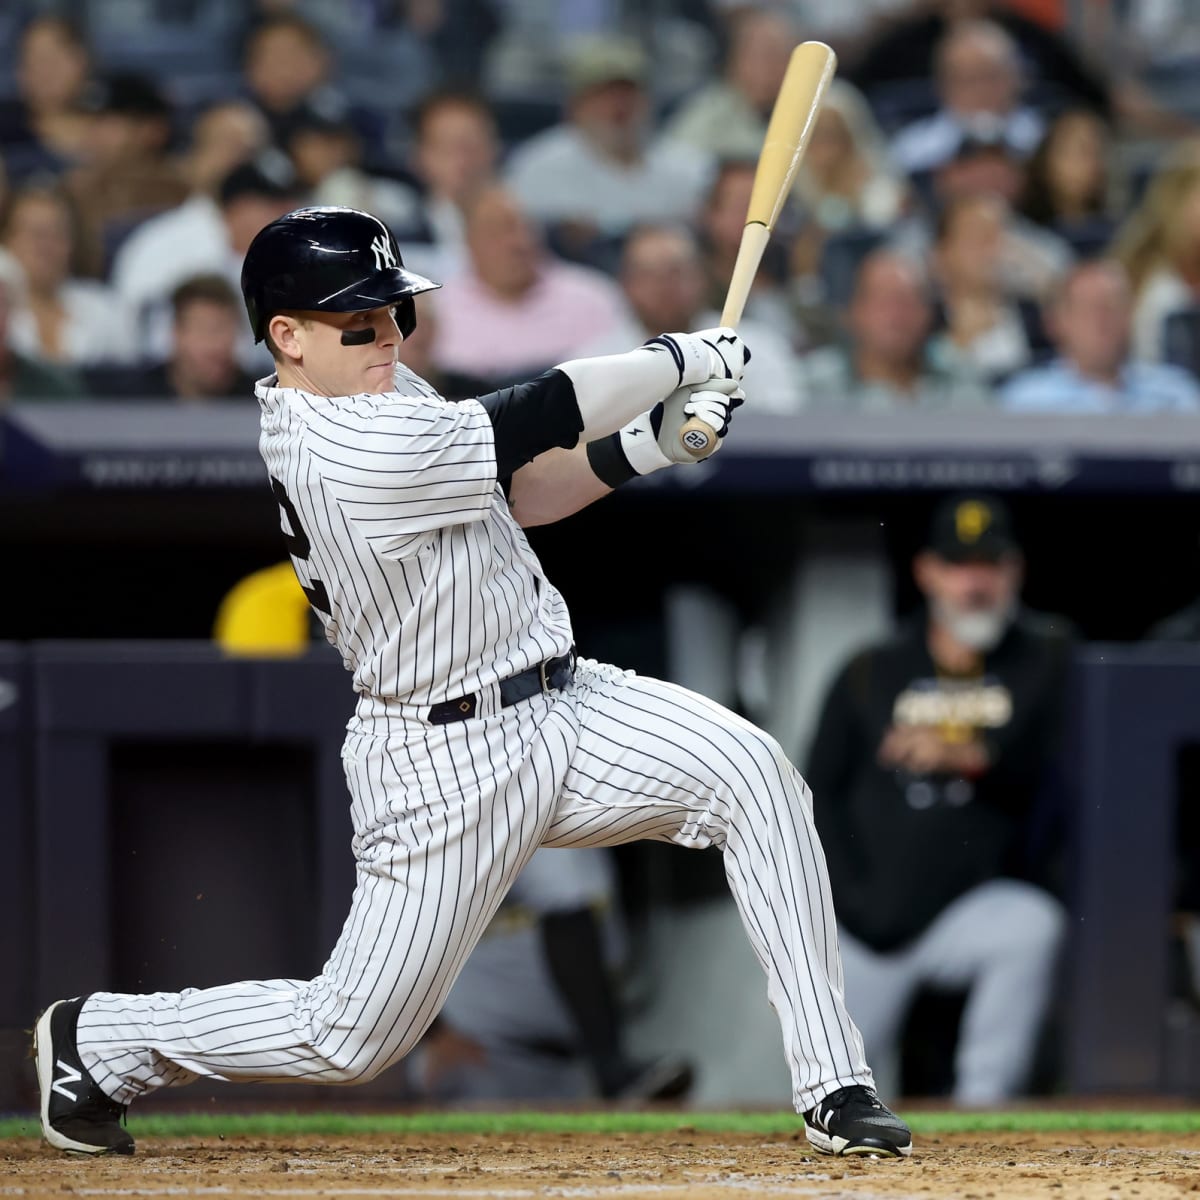 WATCH: Bader RBI Single Gives Yankees Lead in First Game with New Team -  Fastball